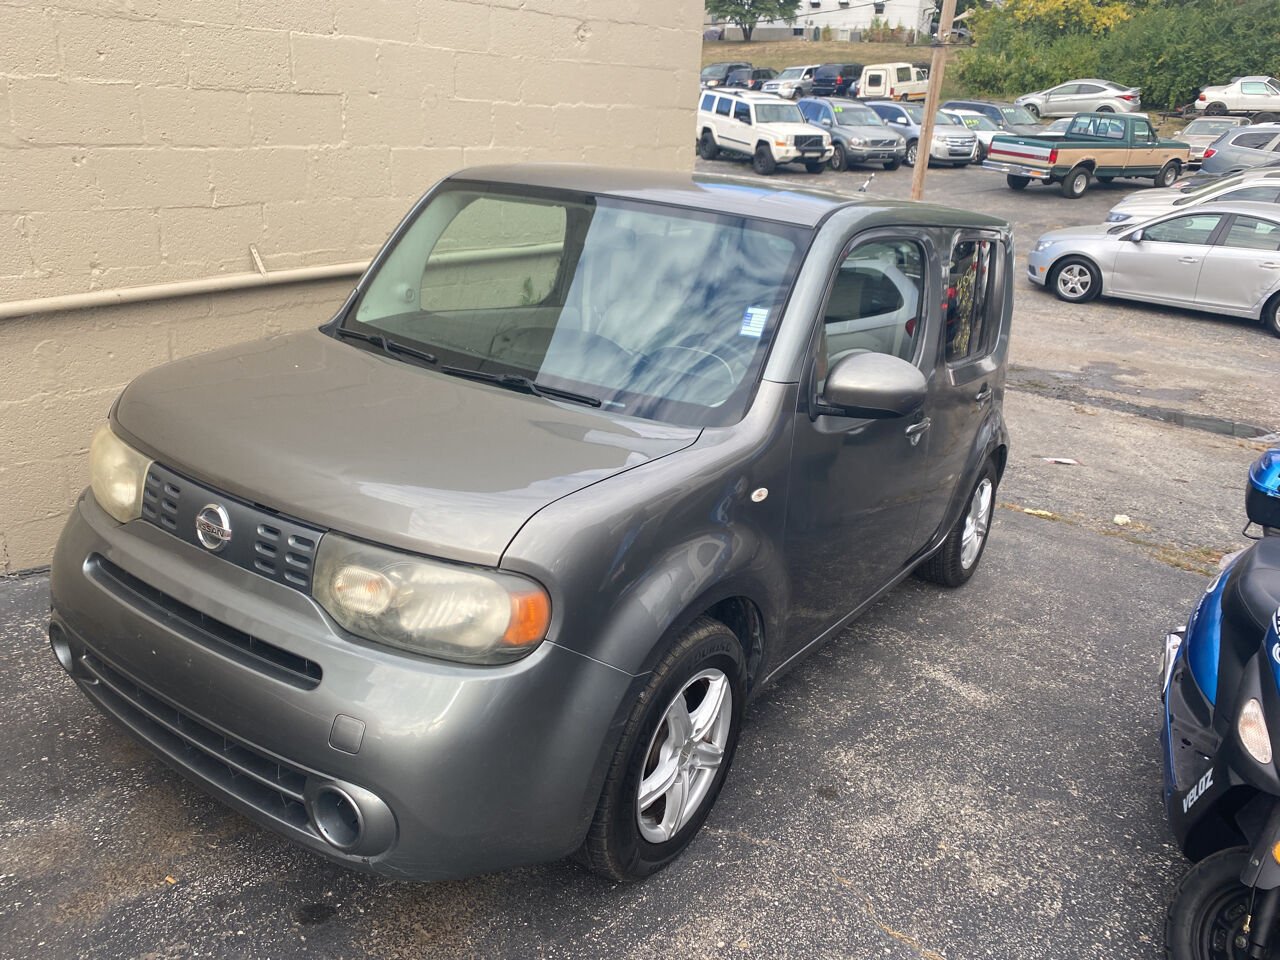 Nissan cube For Sale In Lees Summit, MO ®